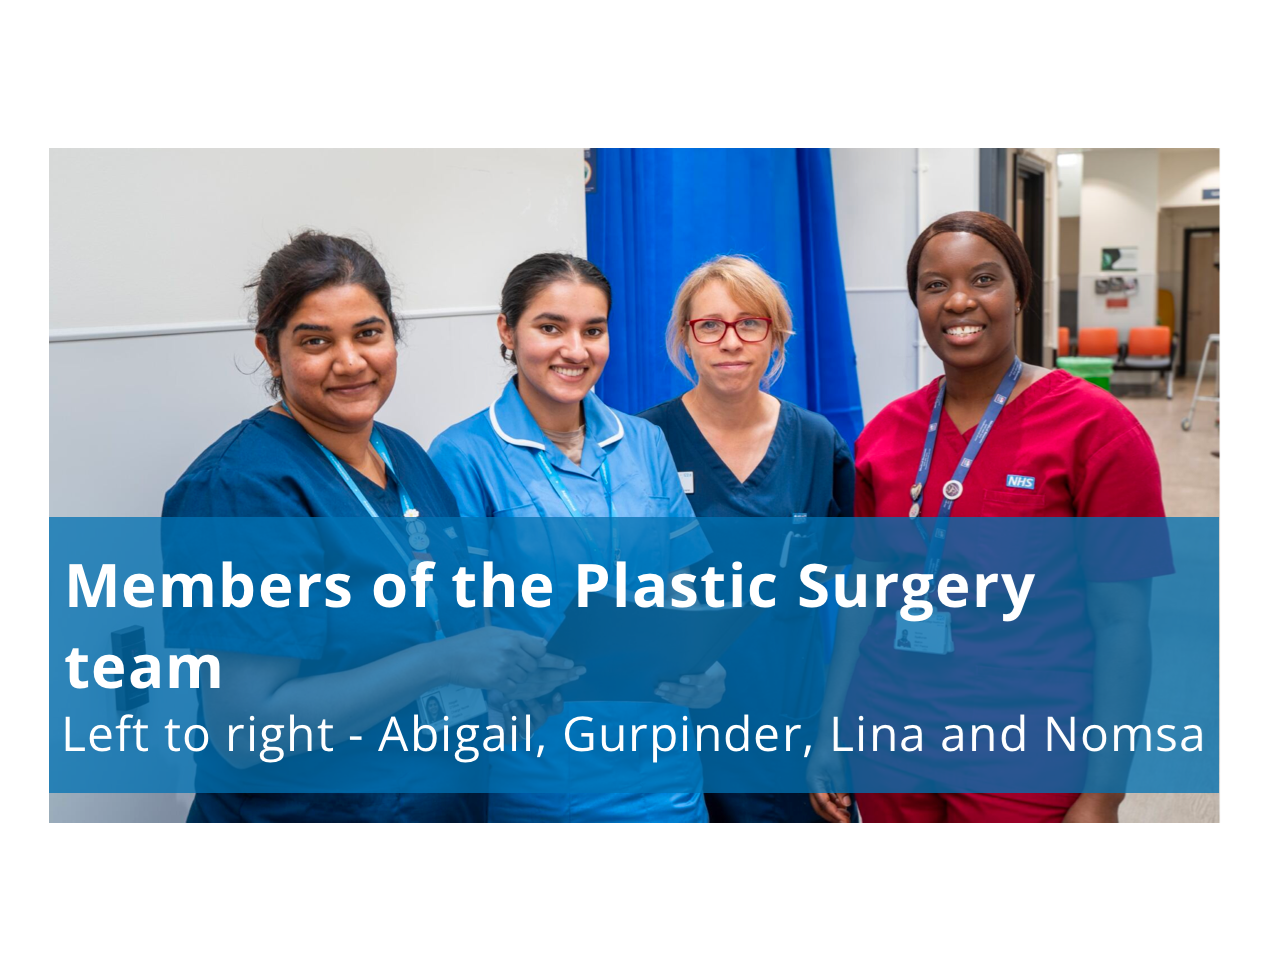 Members of the plastic surgery team